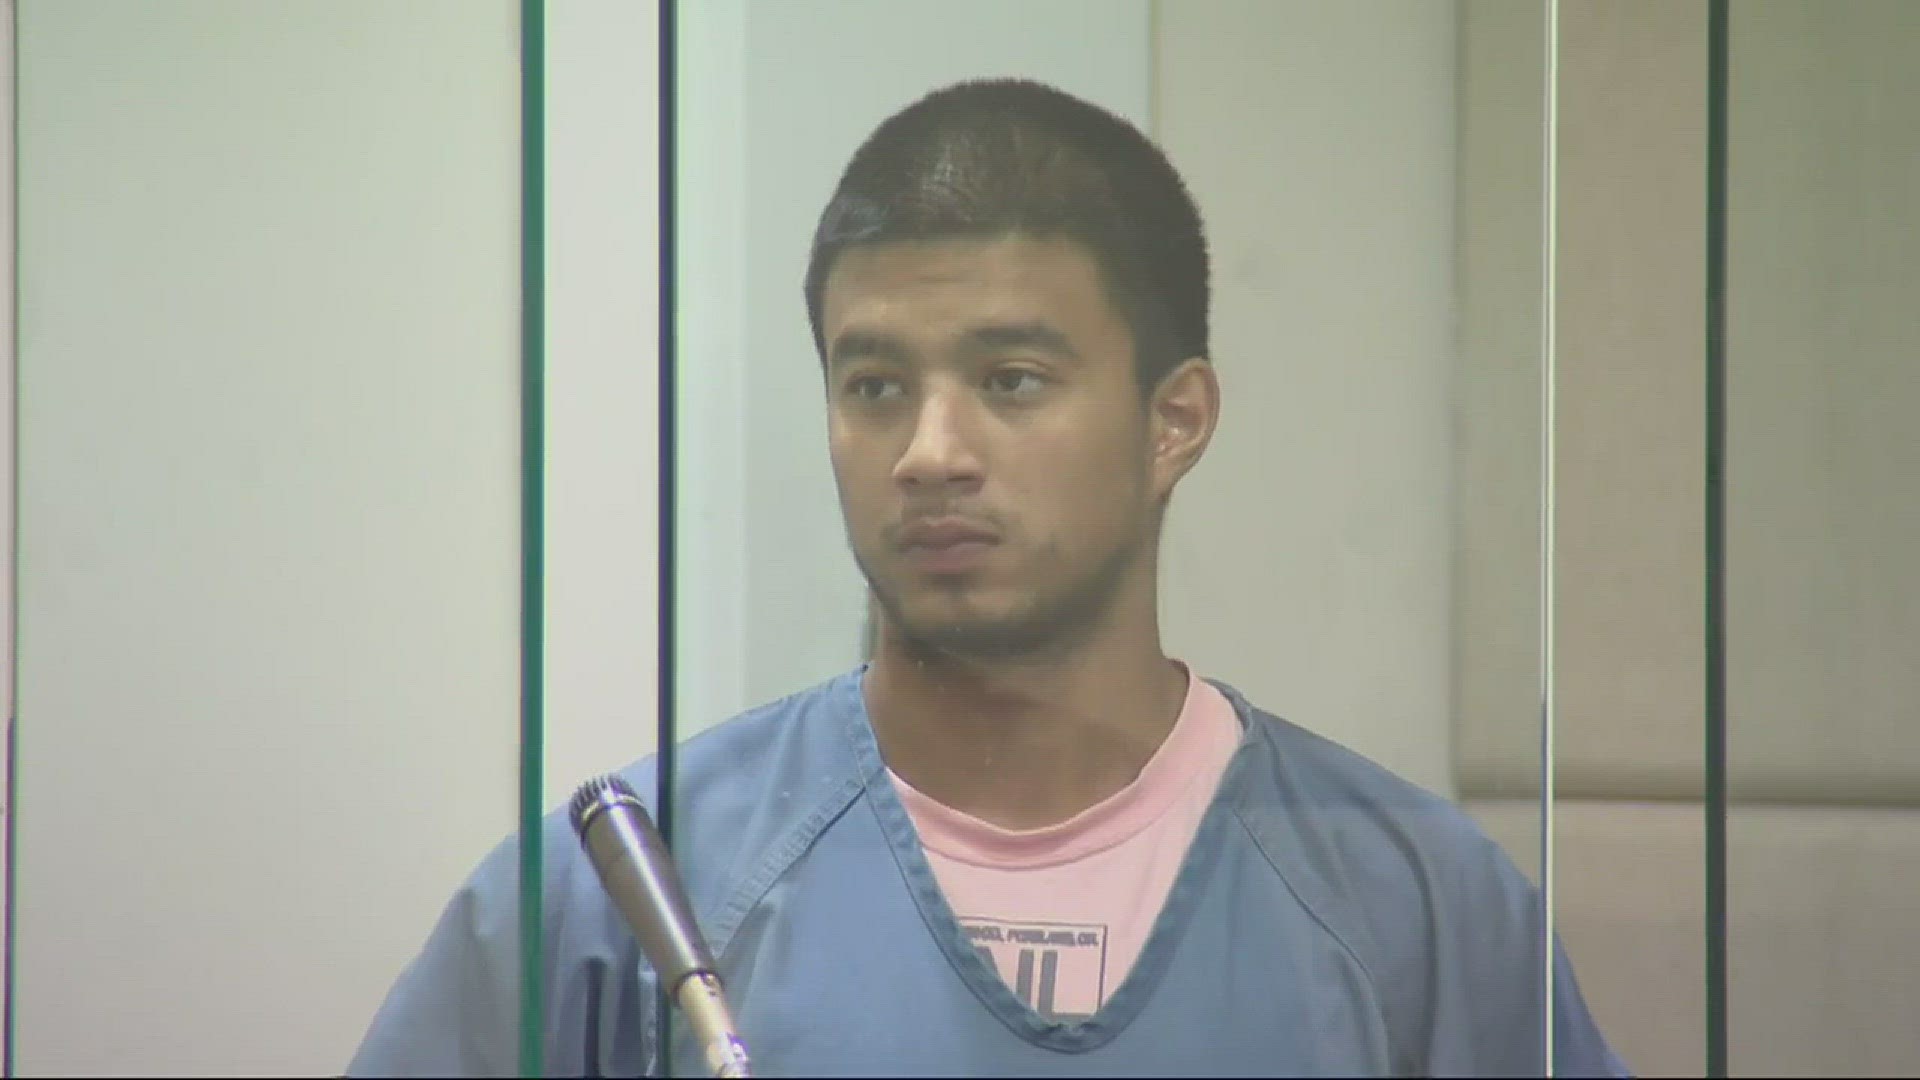 20-year-old pleads not guilty to murder